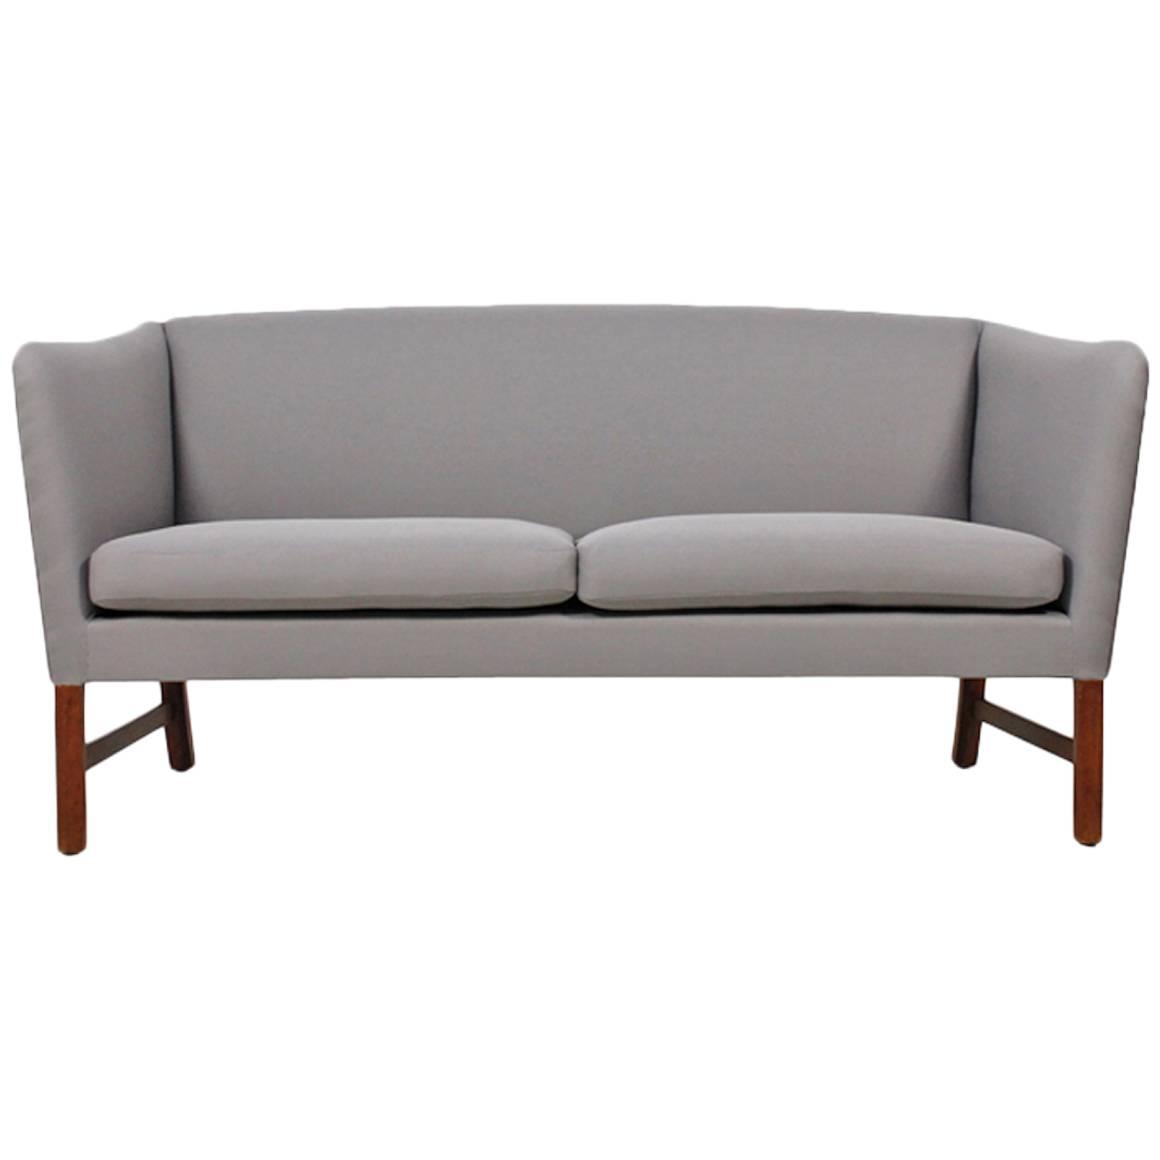 Ole Wanscher Two Seater Sofa Mod 602 For Carl Hansen Danish Love pertaining to loveseats from 1960s pertaining to Your own home